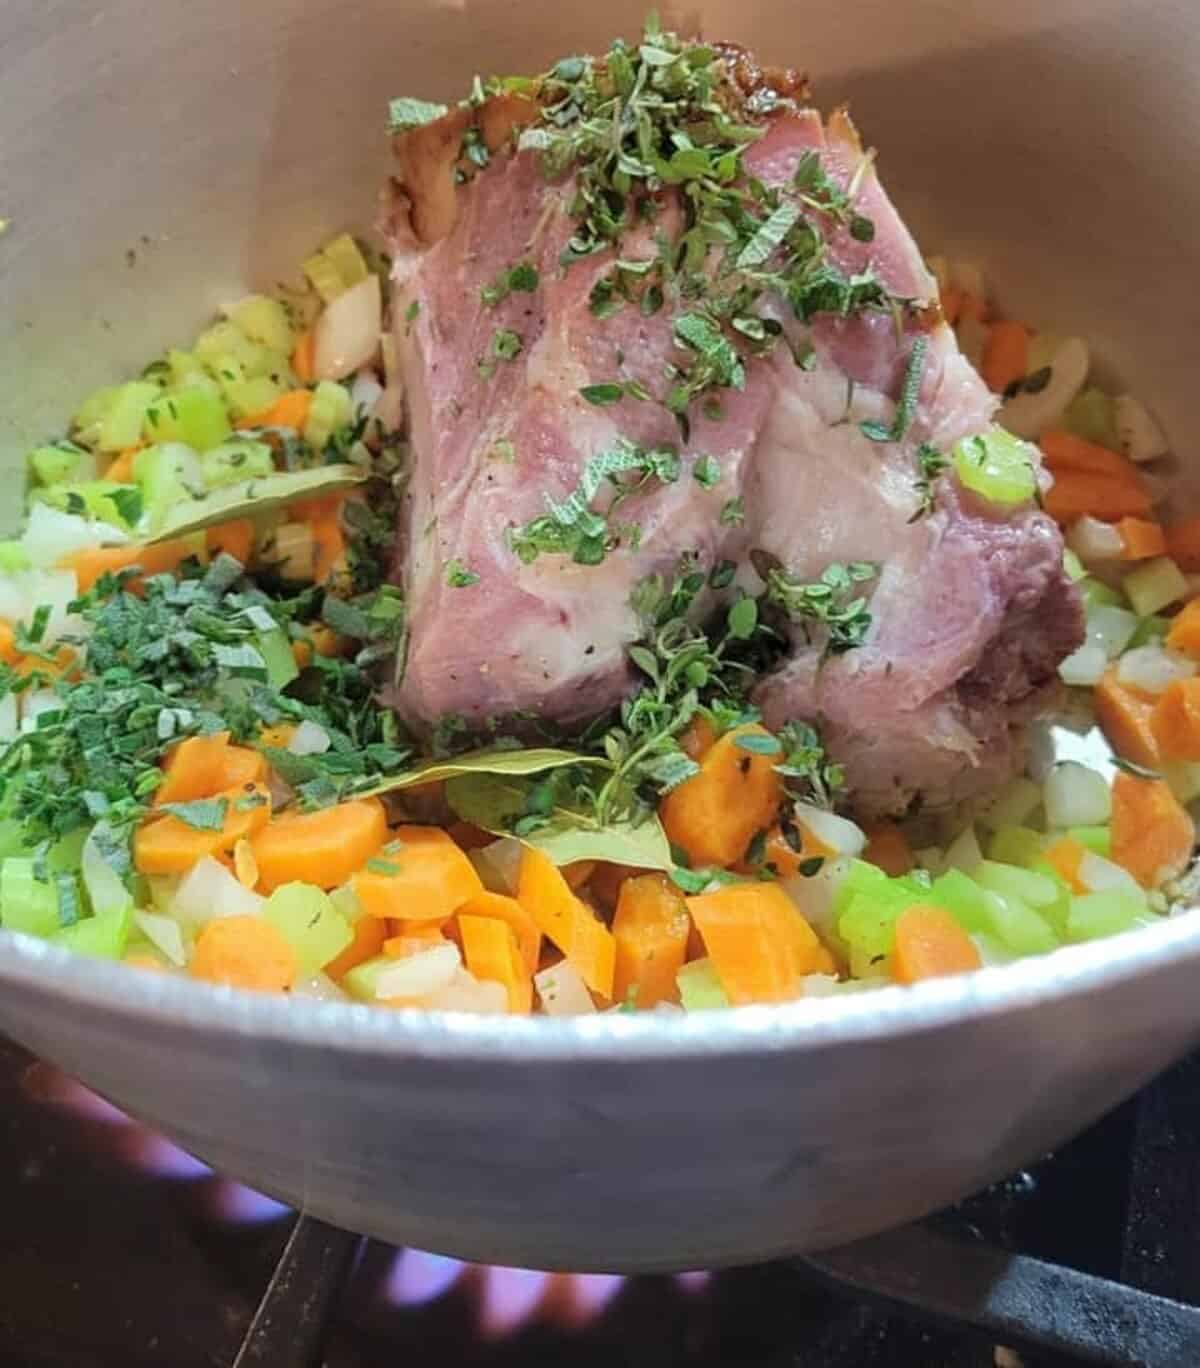 pot on stove over high heat, cut vegetables, ham bone, and herbs inside